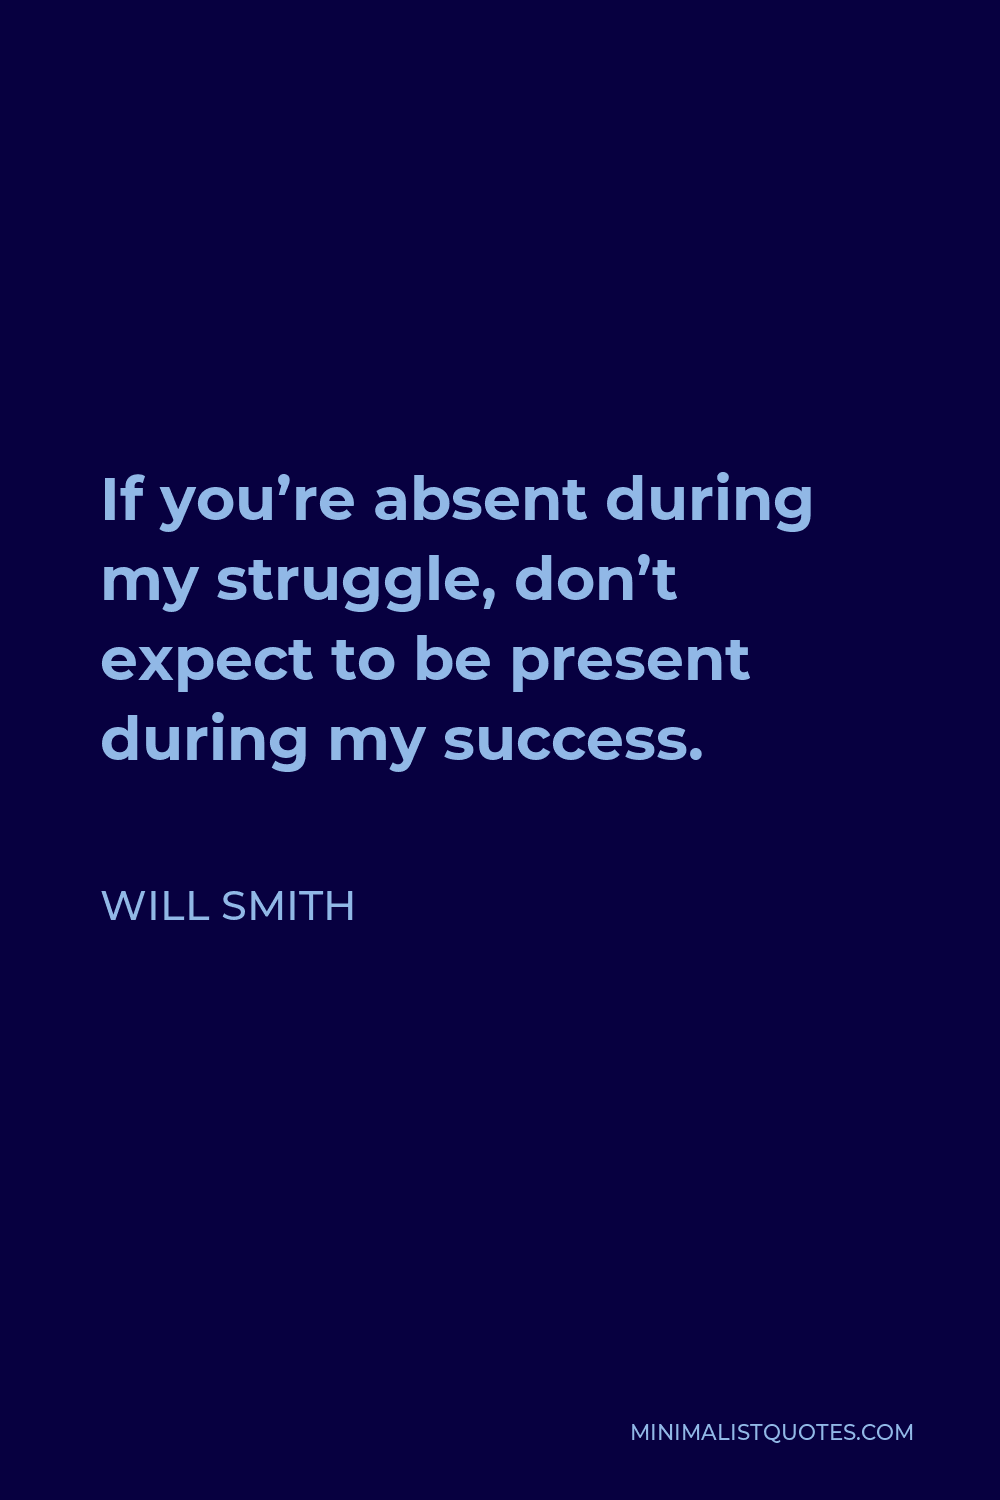 Will Smith Quote - If you’re absent during my struggle, don’t expect to be present during my success.